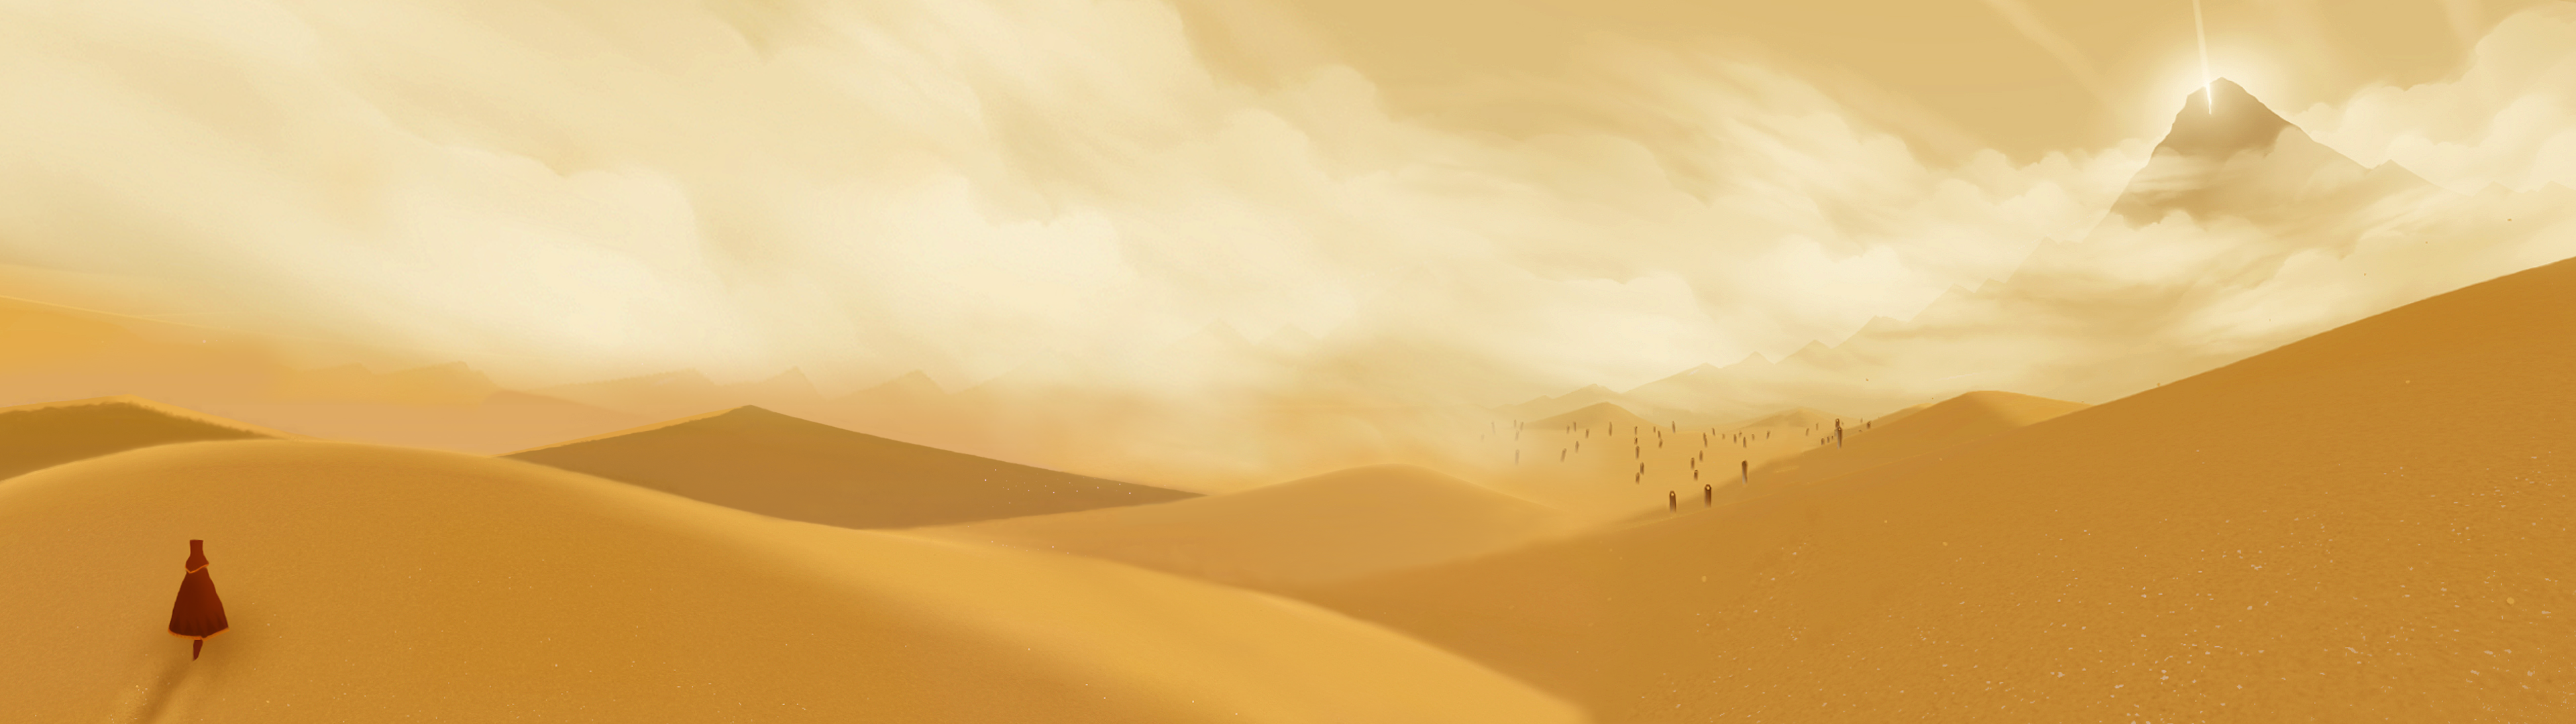 Journey Dual-Screen Wallpaper (3840x1080) by Nonexistent-One on ...